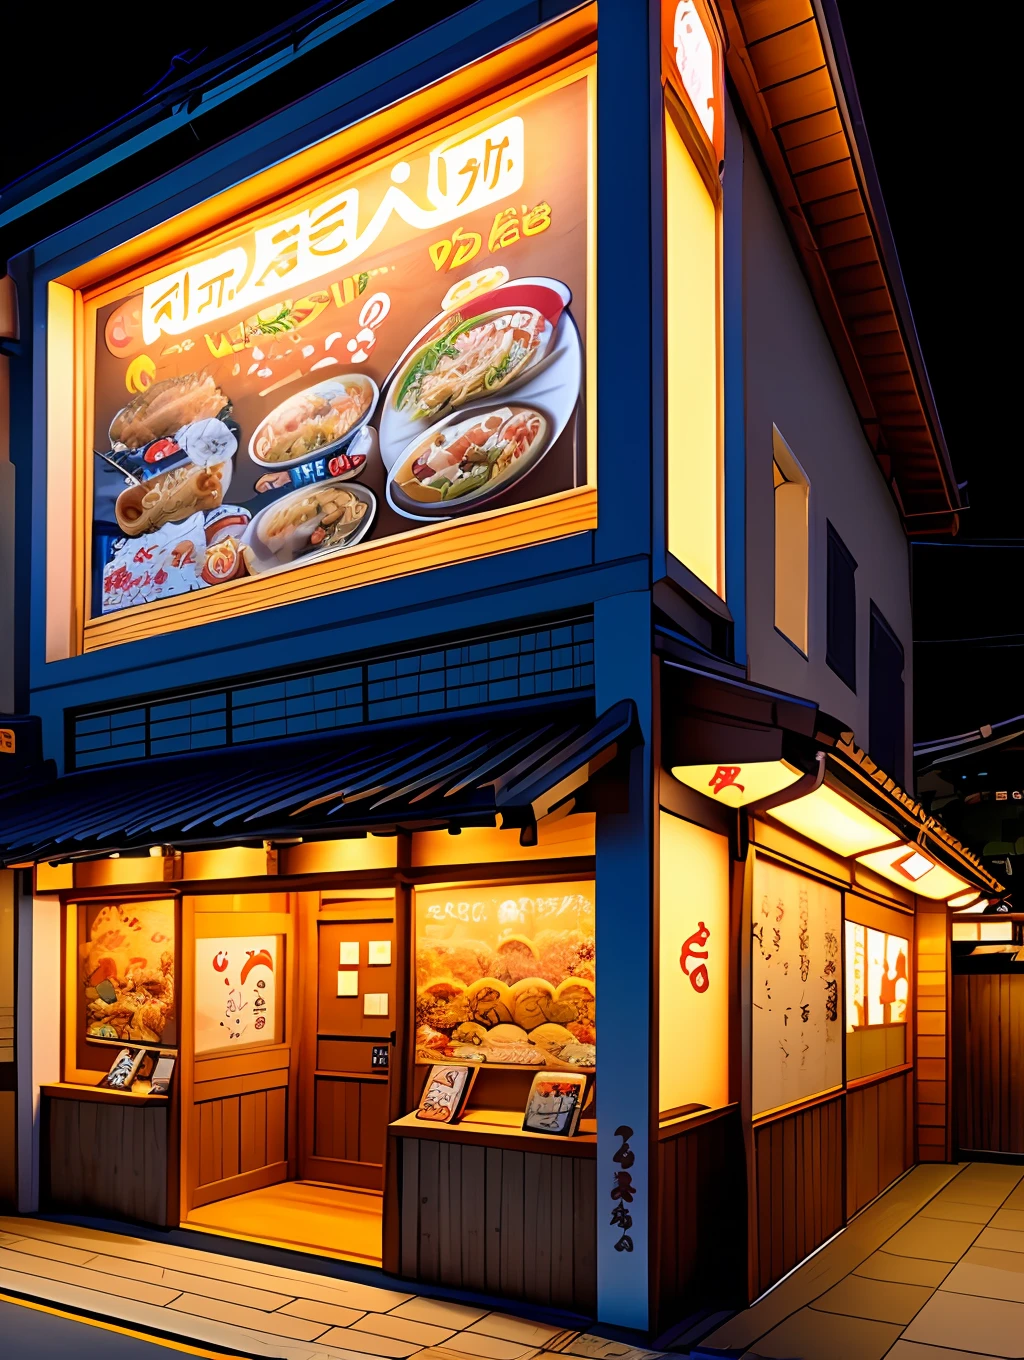 The ramen shop exterior, decorated with various cartoon characters, and easy-to-read menu signs, Japan, night view